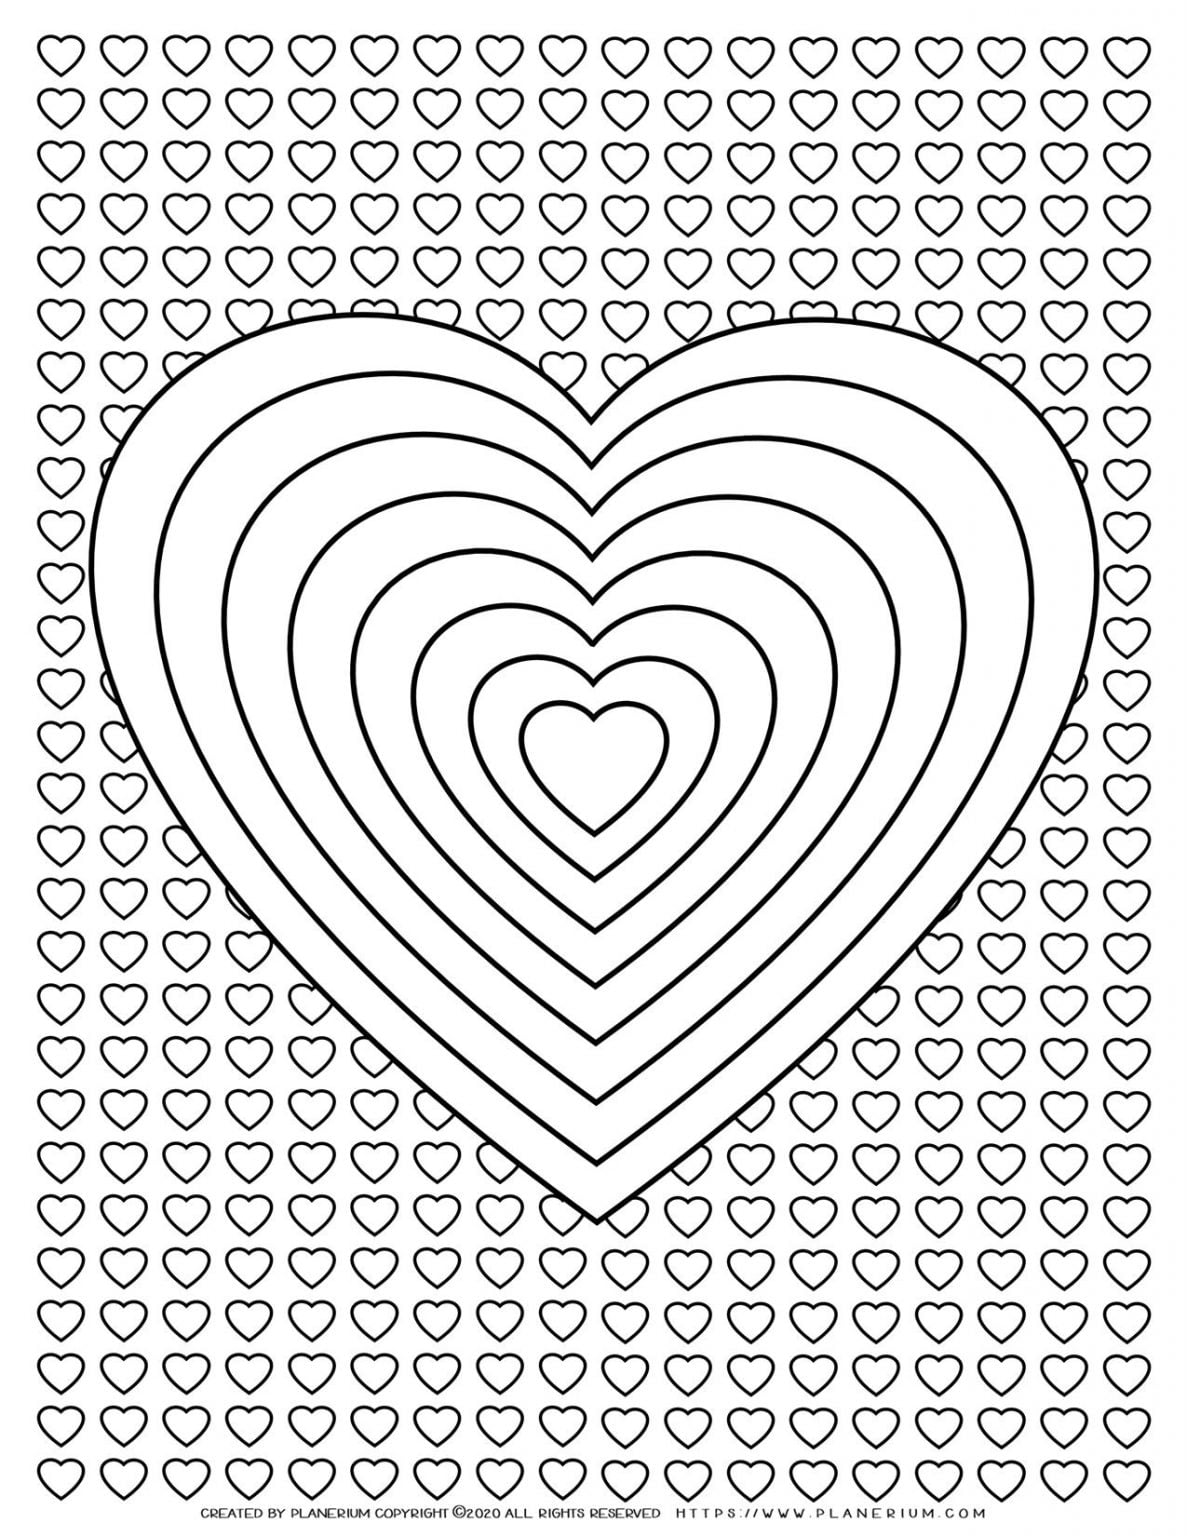 Valentines Day - Coloring Page - Heart Riddles With Hearts Background | Planerium